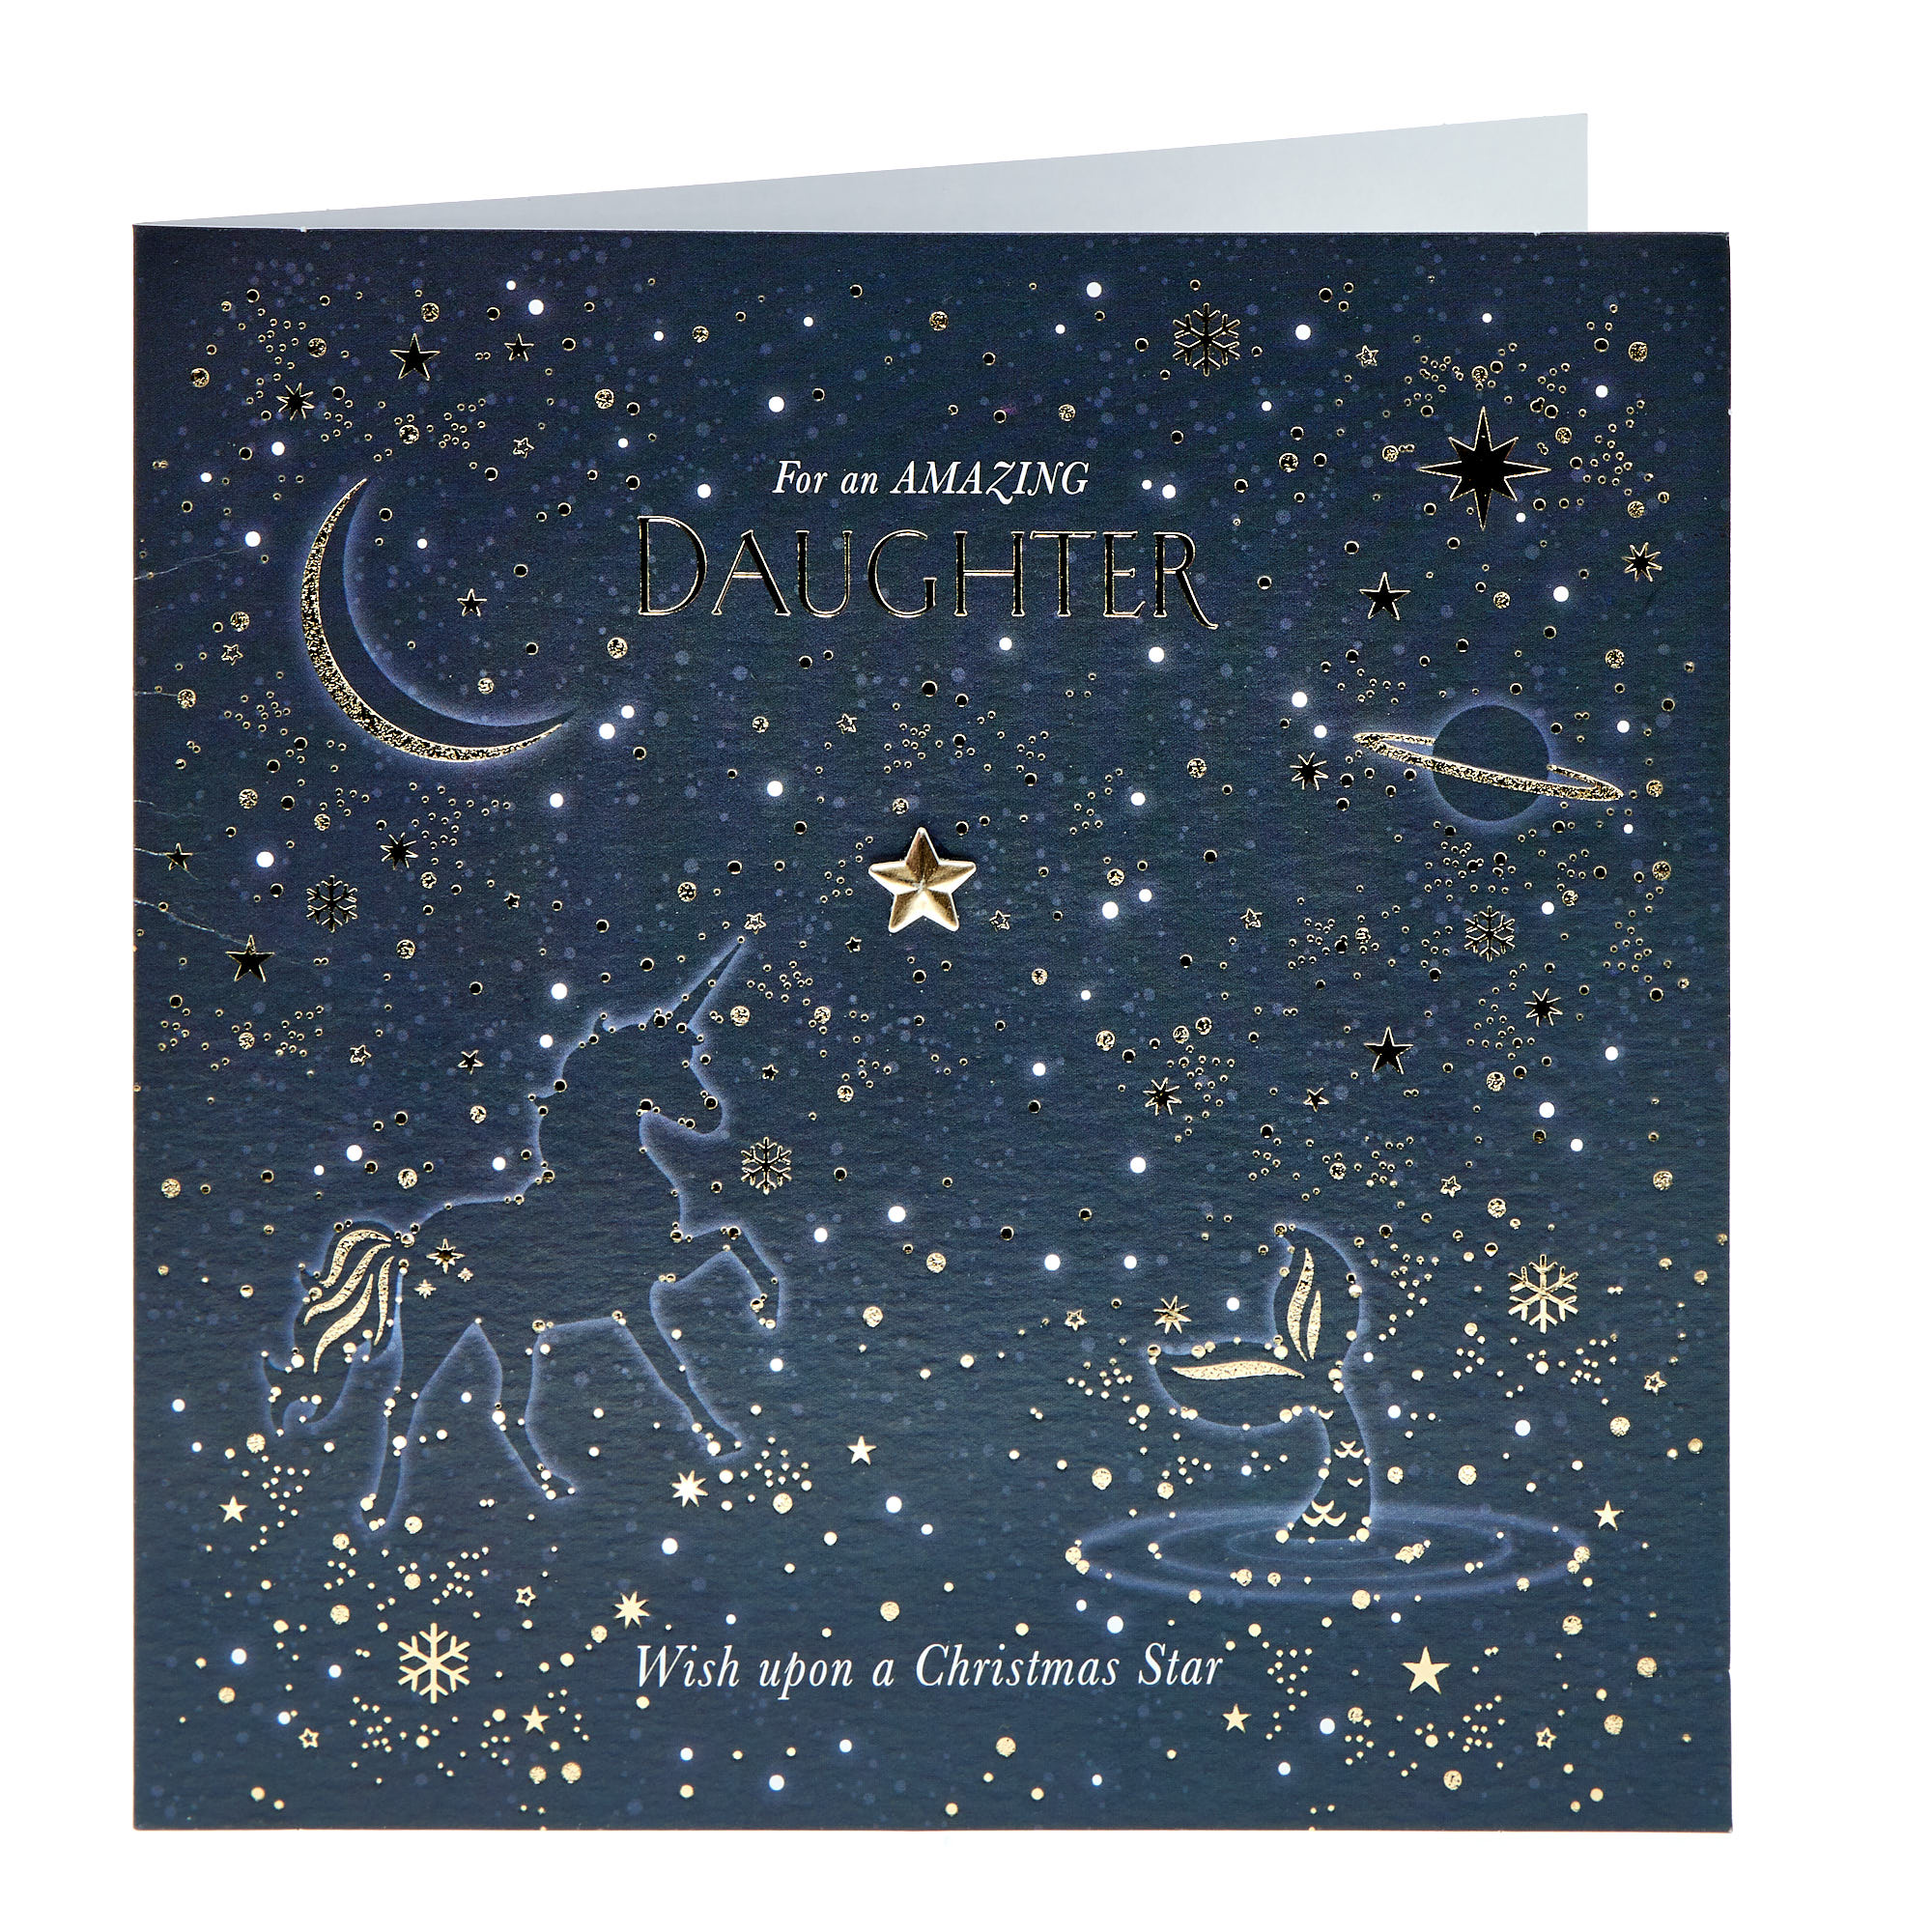 Exquisite Collection Christmas Card - Daughter, Wish Upon a Christmas Star